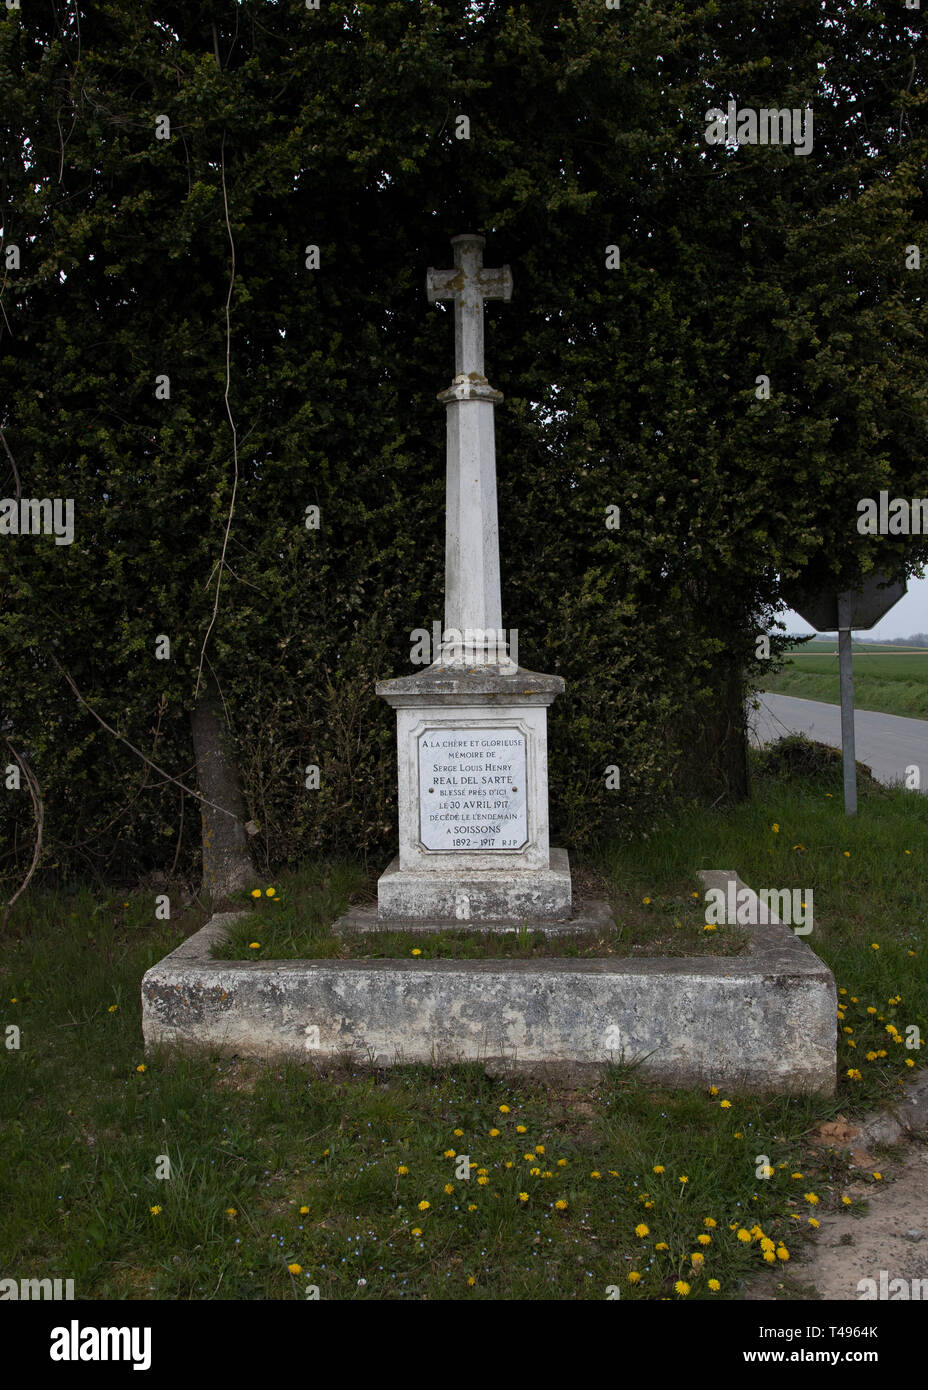 A memorial commemorating the French soldier Serge Louis Henry Real del Sarte Stock Photo